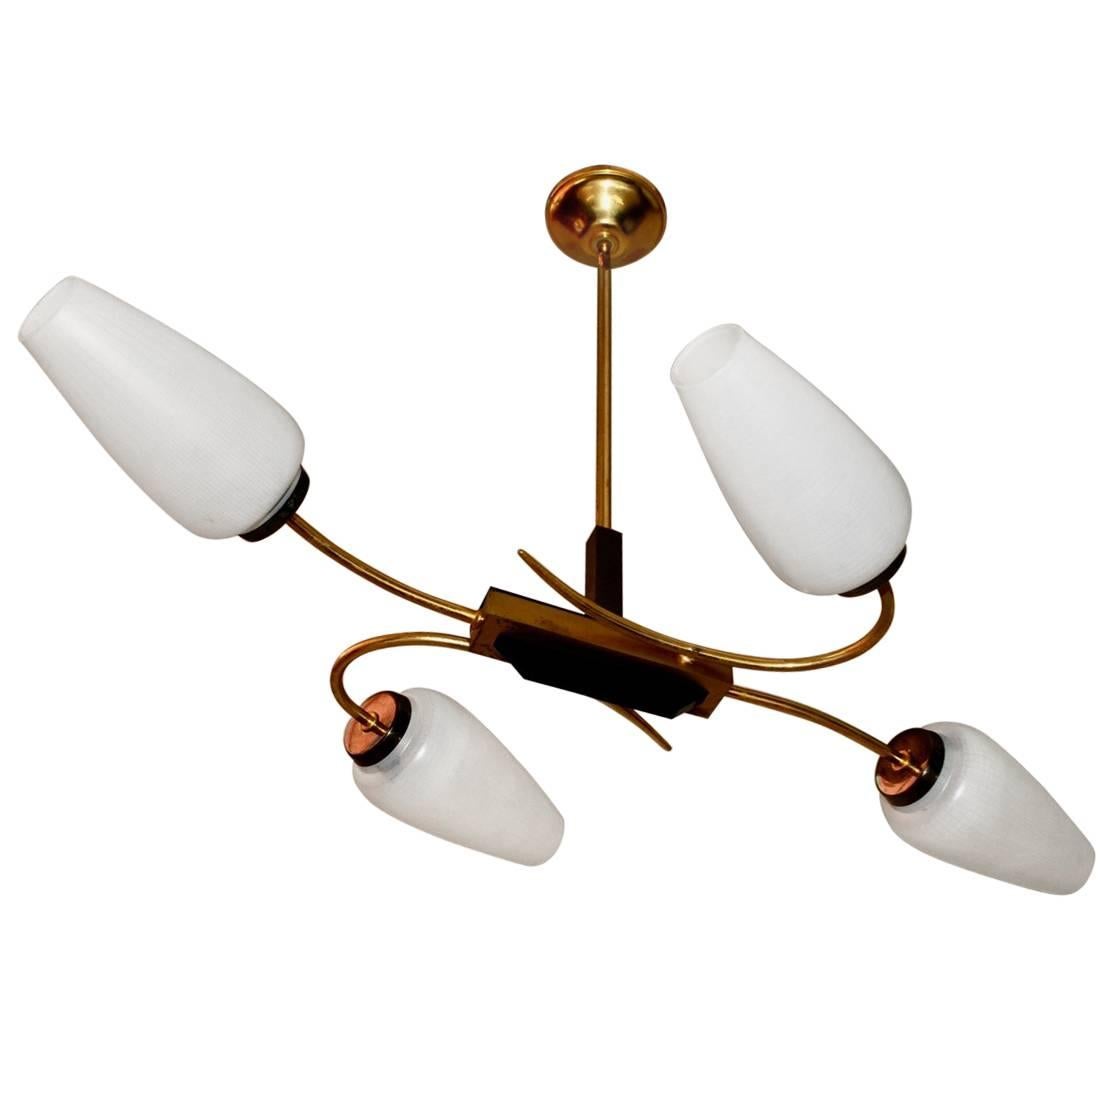 Elegant French Midcentury Chandelier Attributed to Maison Arlus